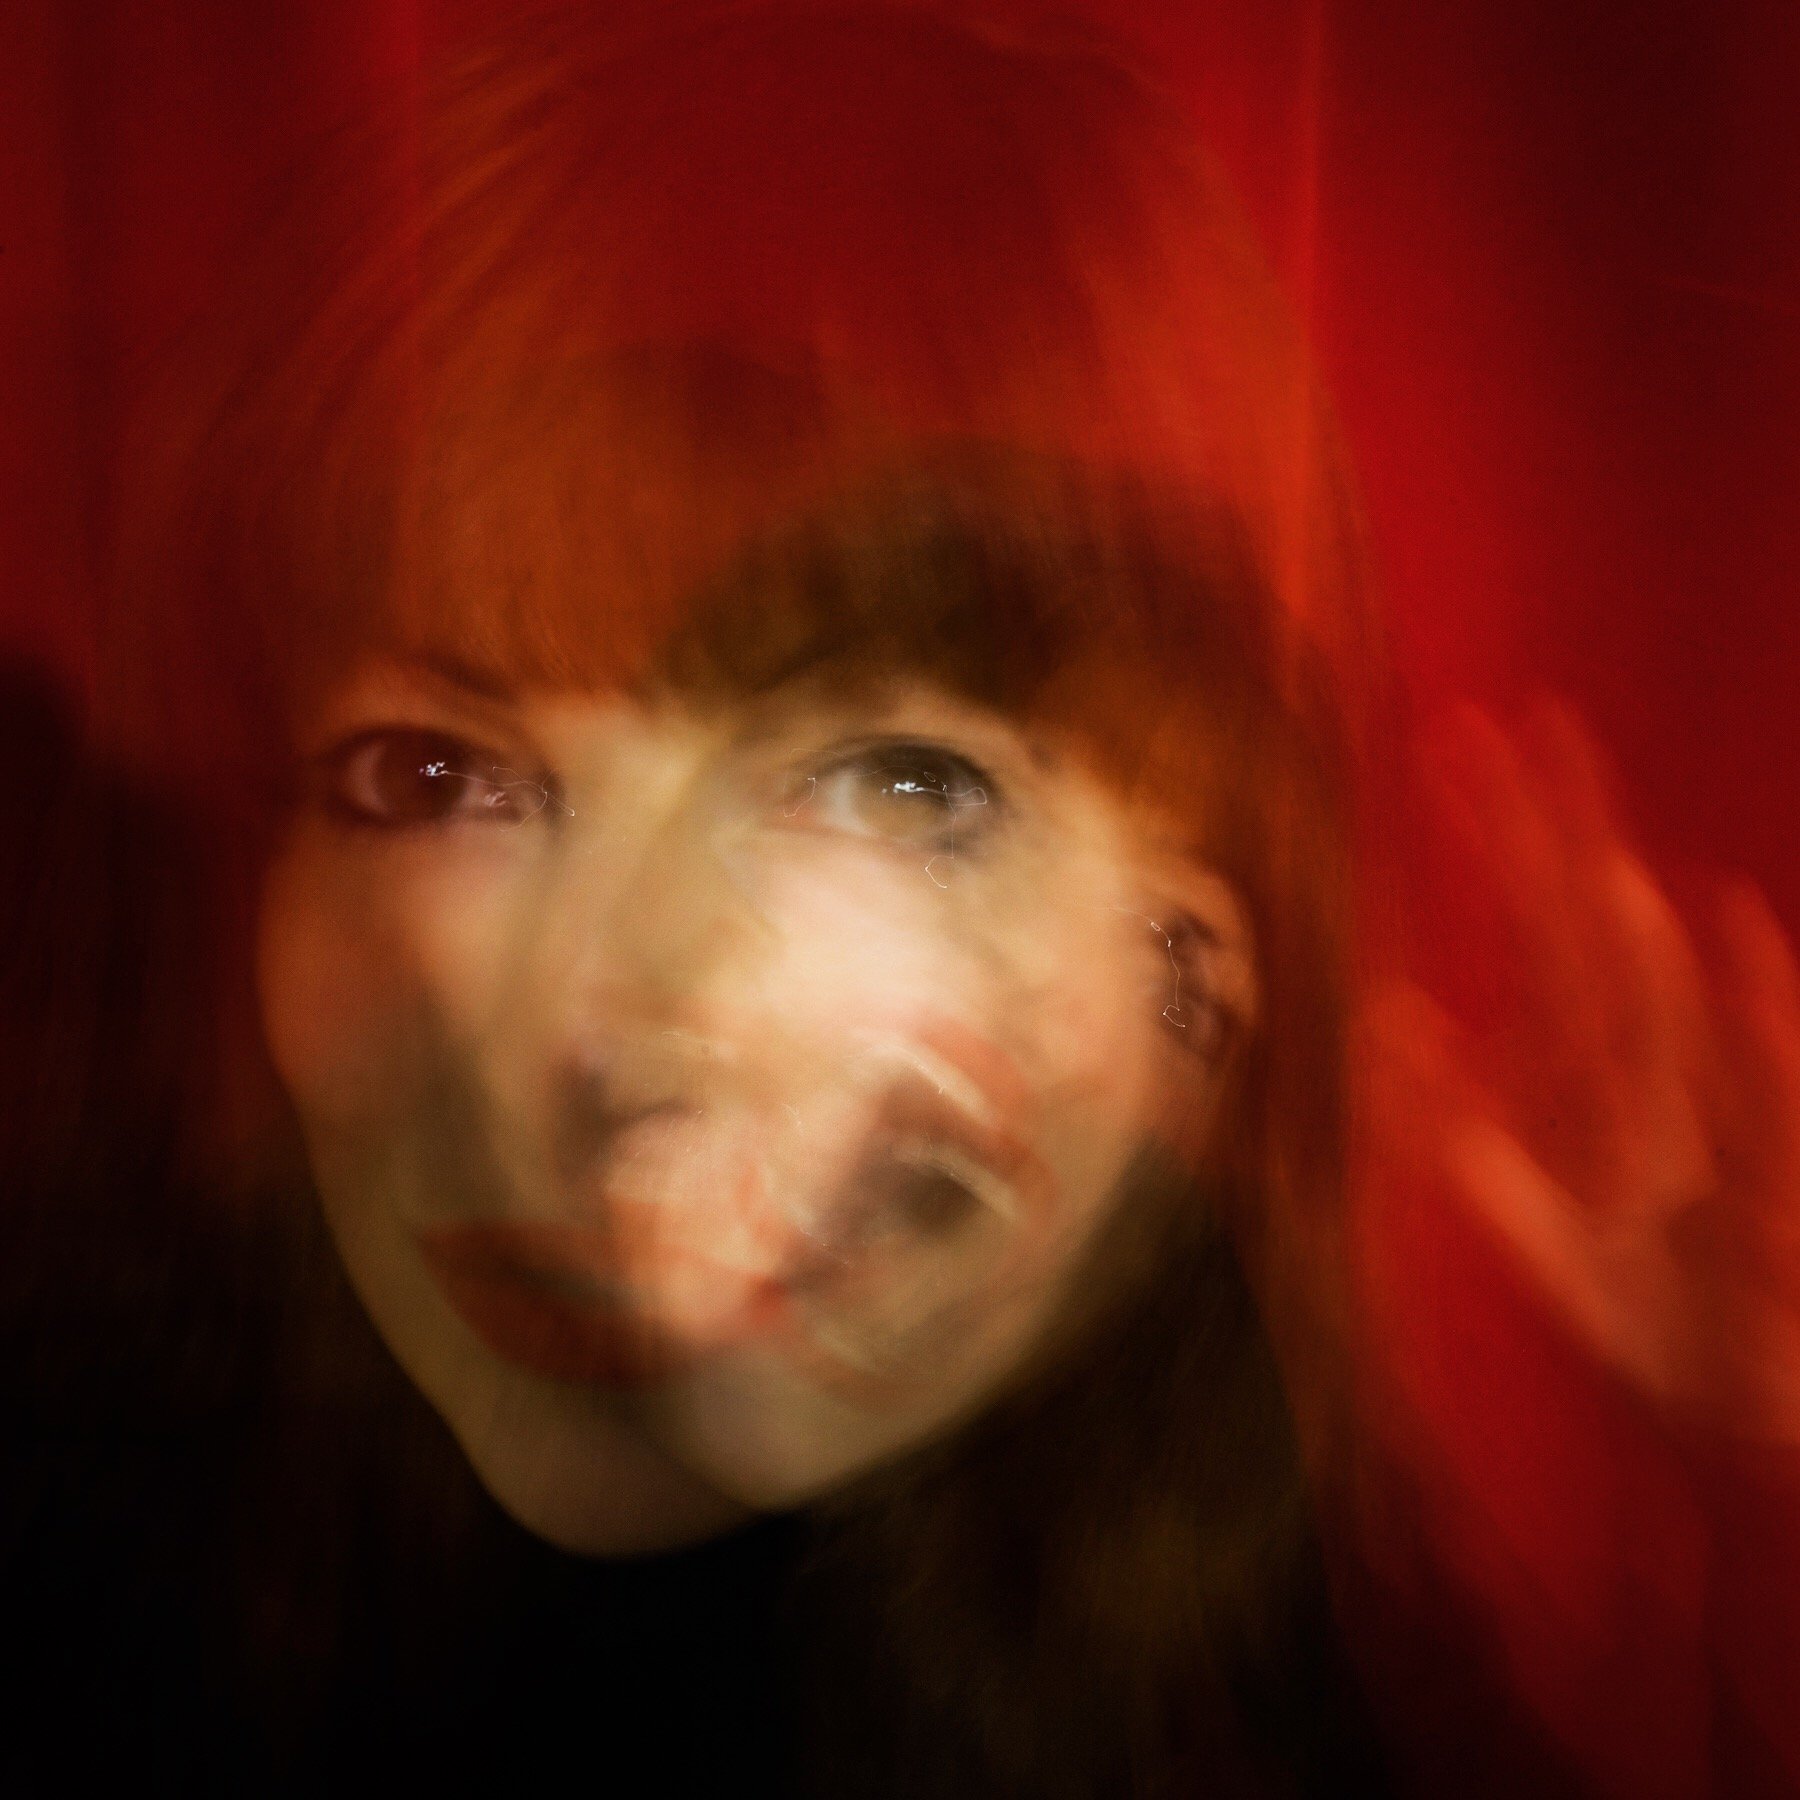  solen collet fine art photographer scotland red room series self portraiture, analogue and digital self portrait photography, scottish visual artist 